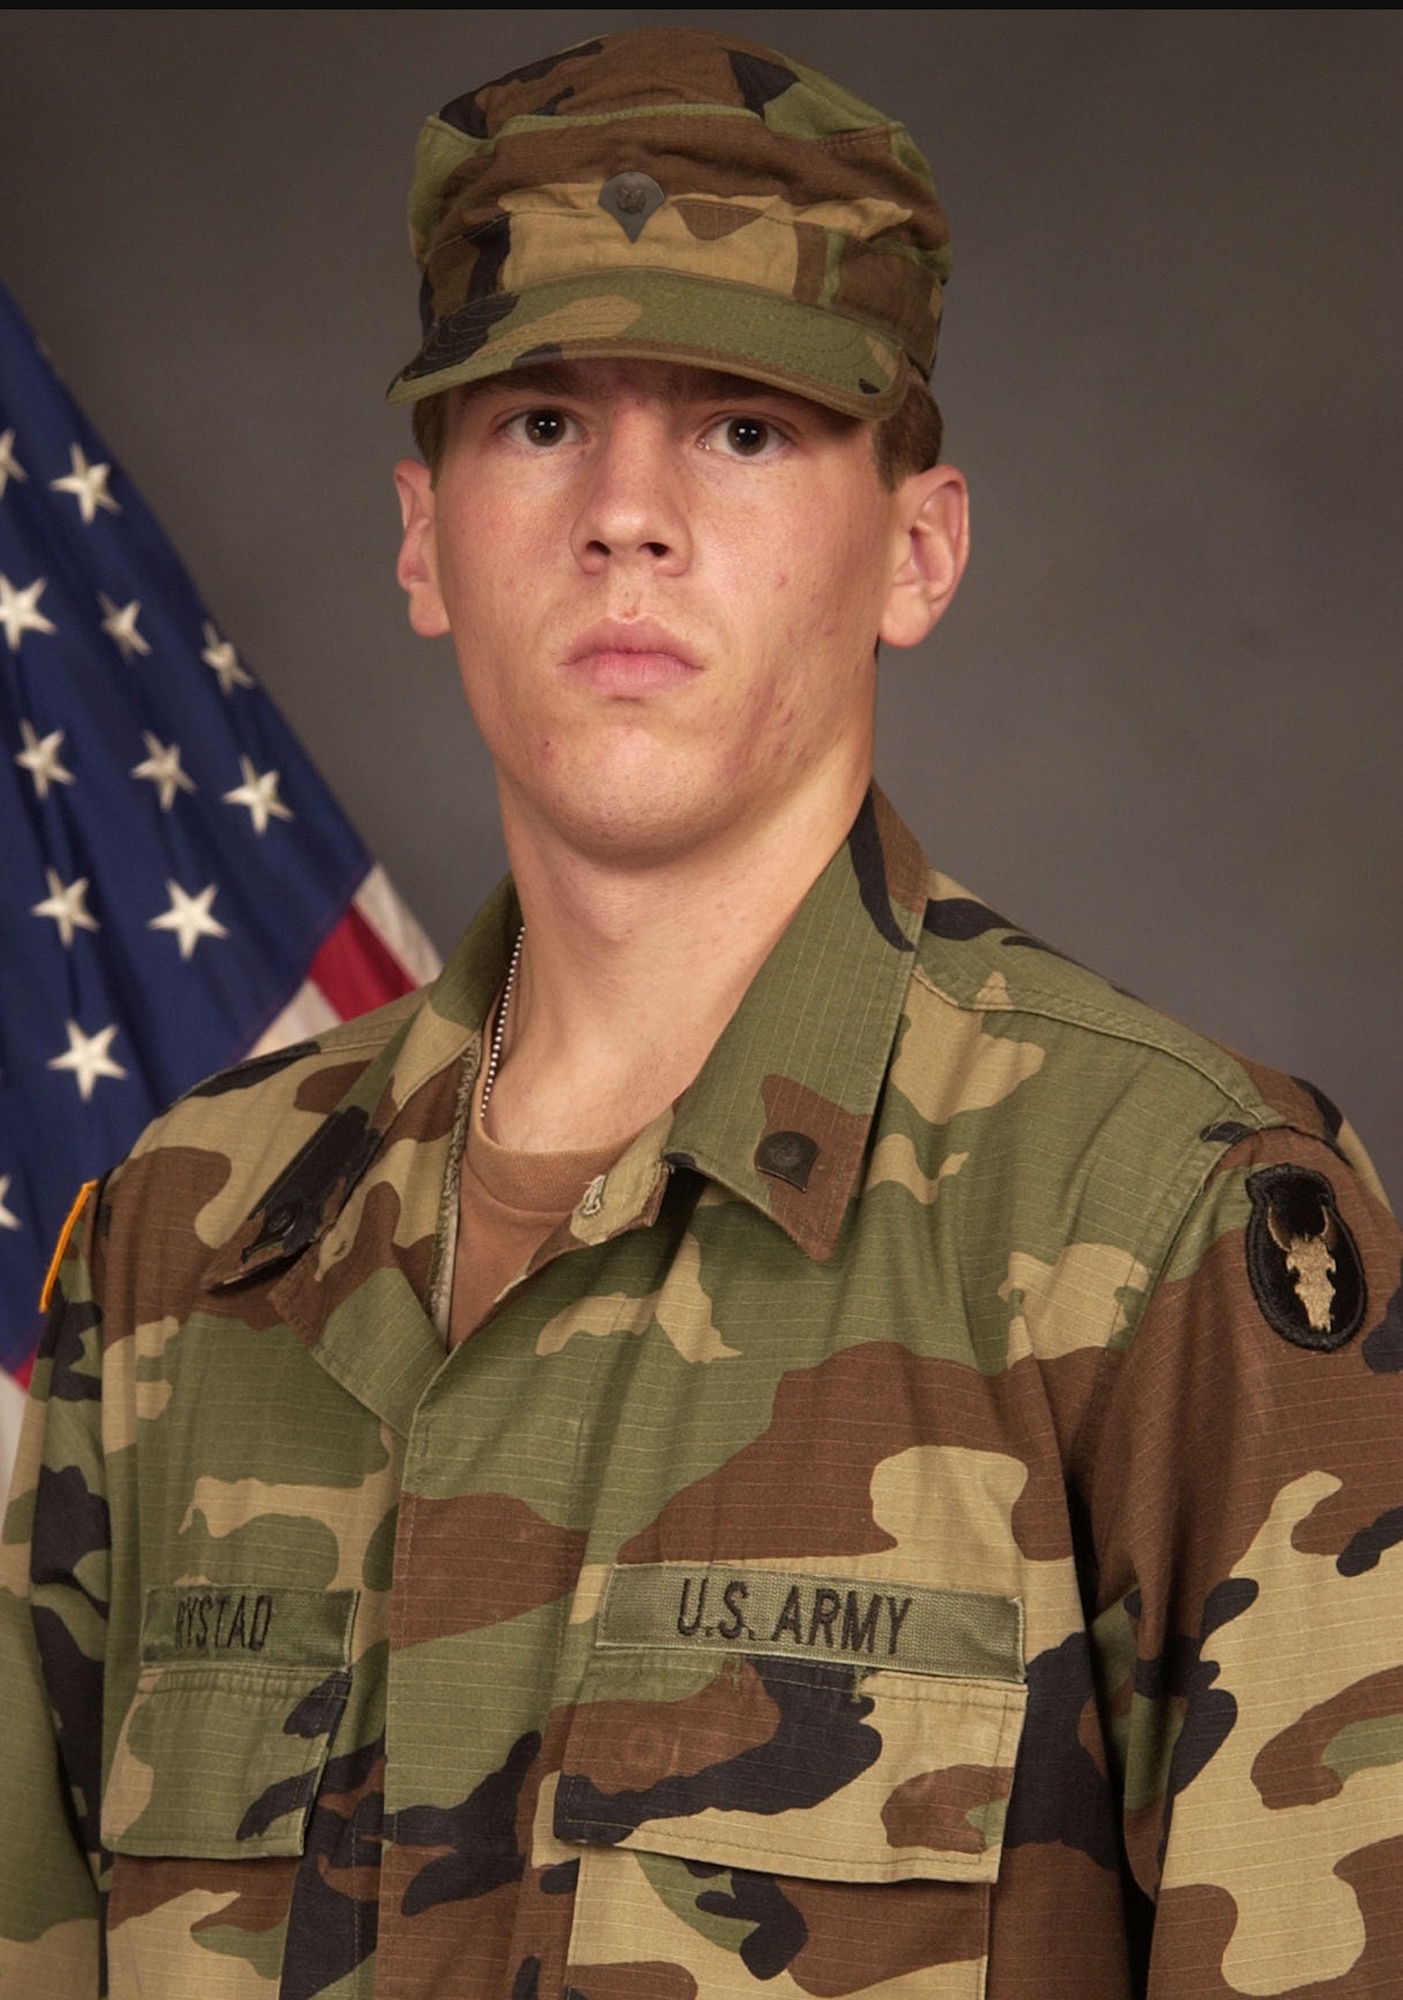 This official Army photo shows Corey J. Rystad wearing the rank of specialist. Sgt. Rystad, of Red Lake Falls, MinnCorey J. Rystad, 20, of Red Lake Falls, Minn., was killed in combat while traveling on a patrol mission near Fallujah, Iraq, after an improvised explosive device detonated near his vehicle on Dec. 2, 2006. His child hood friend, Kurt Philion, honors Rystad’s memory by carrying a 3-foot by 5-foot American flag while running races with a T-shirt bearing an image of the soldier. (File photo courtesy of Minnesota National Guard)